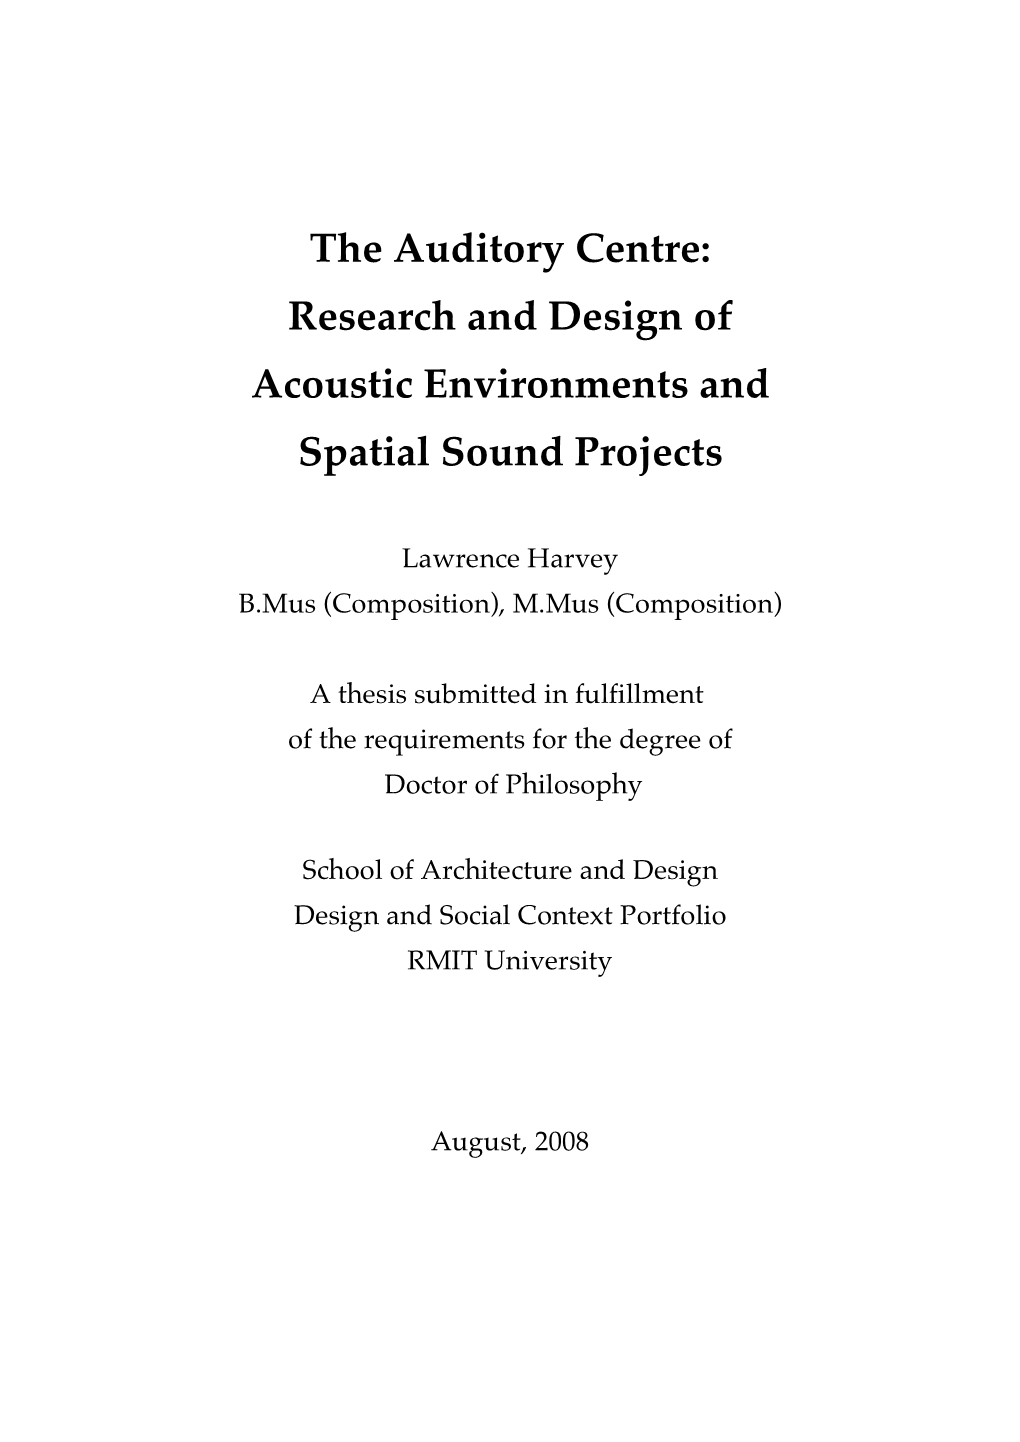 The Auditory Centre: Research and Design of Acoustic Environments And